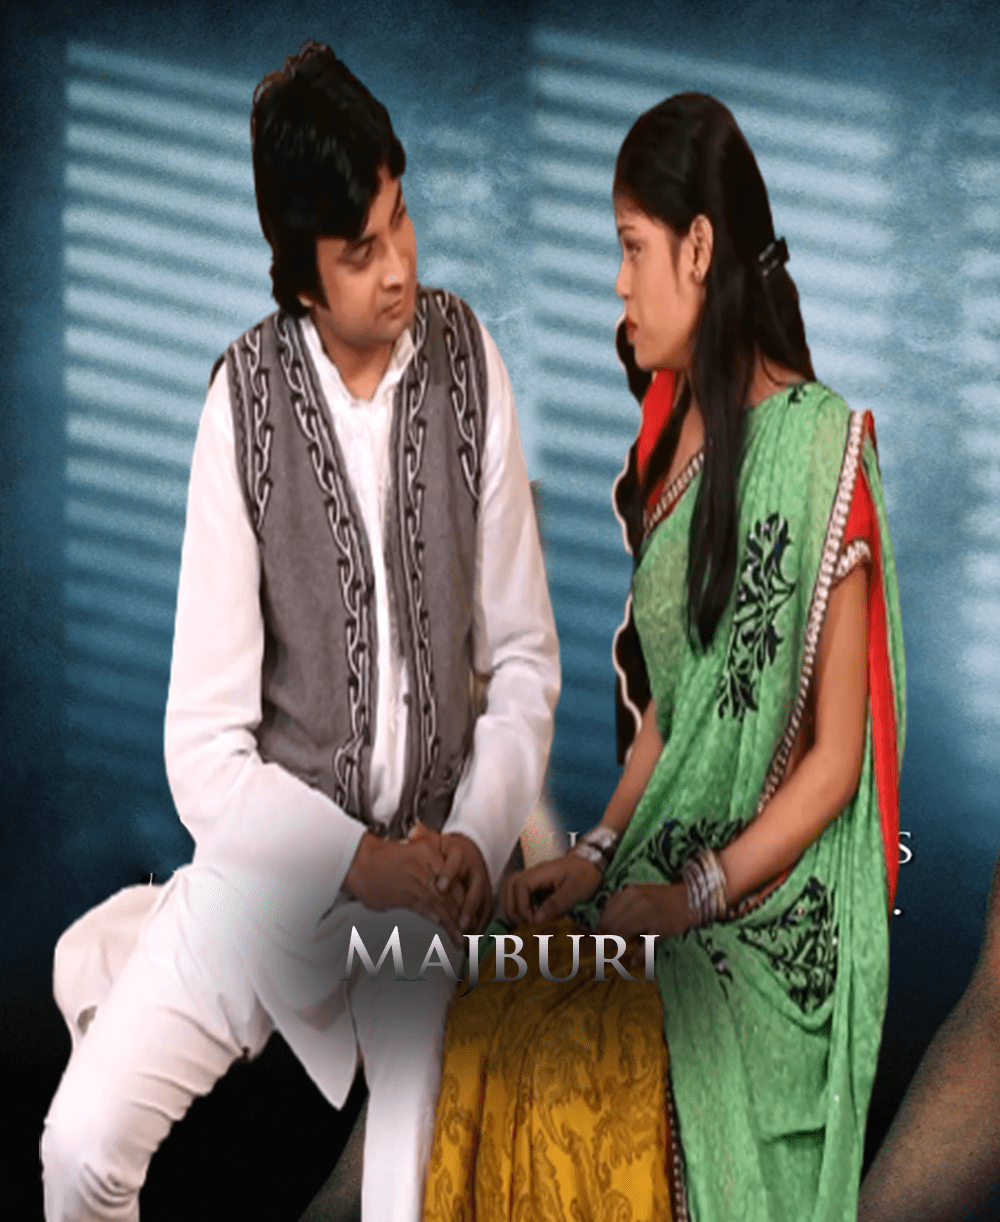 You are currently viewing Majburi 2021 Hindi Hot Short Film 720p HDRip 150MB Download & Watch Online